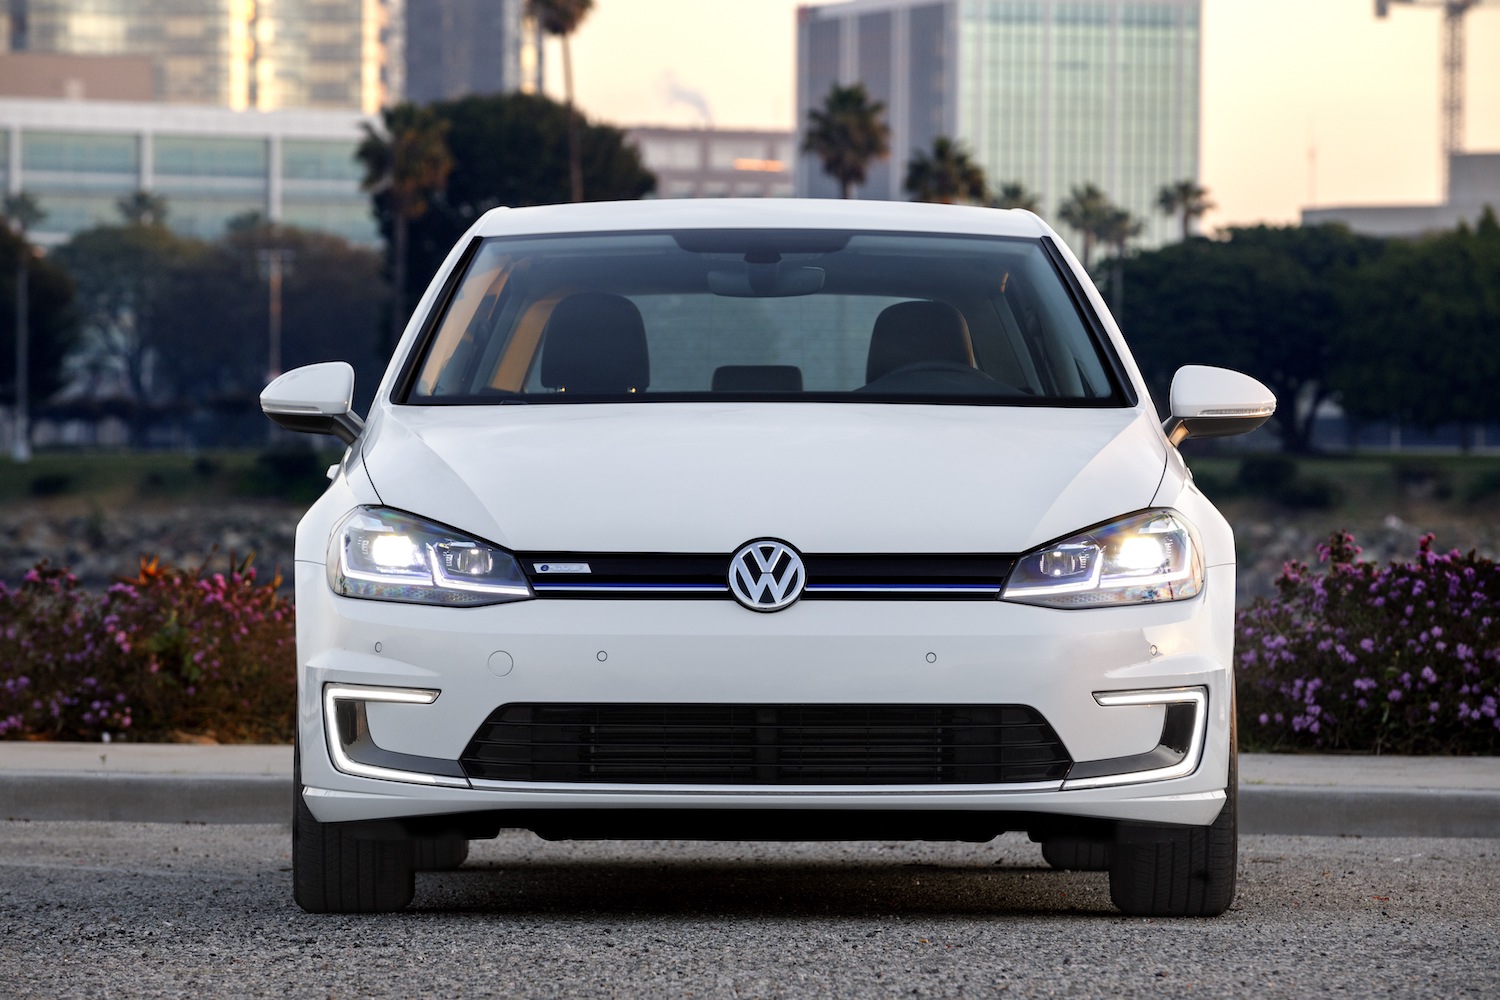 VW exec hints that Golf brand could be future of Volkswagen electric cars -  The Manual